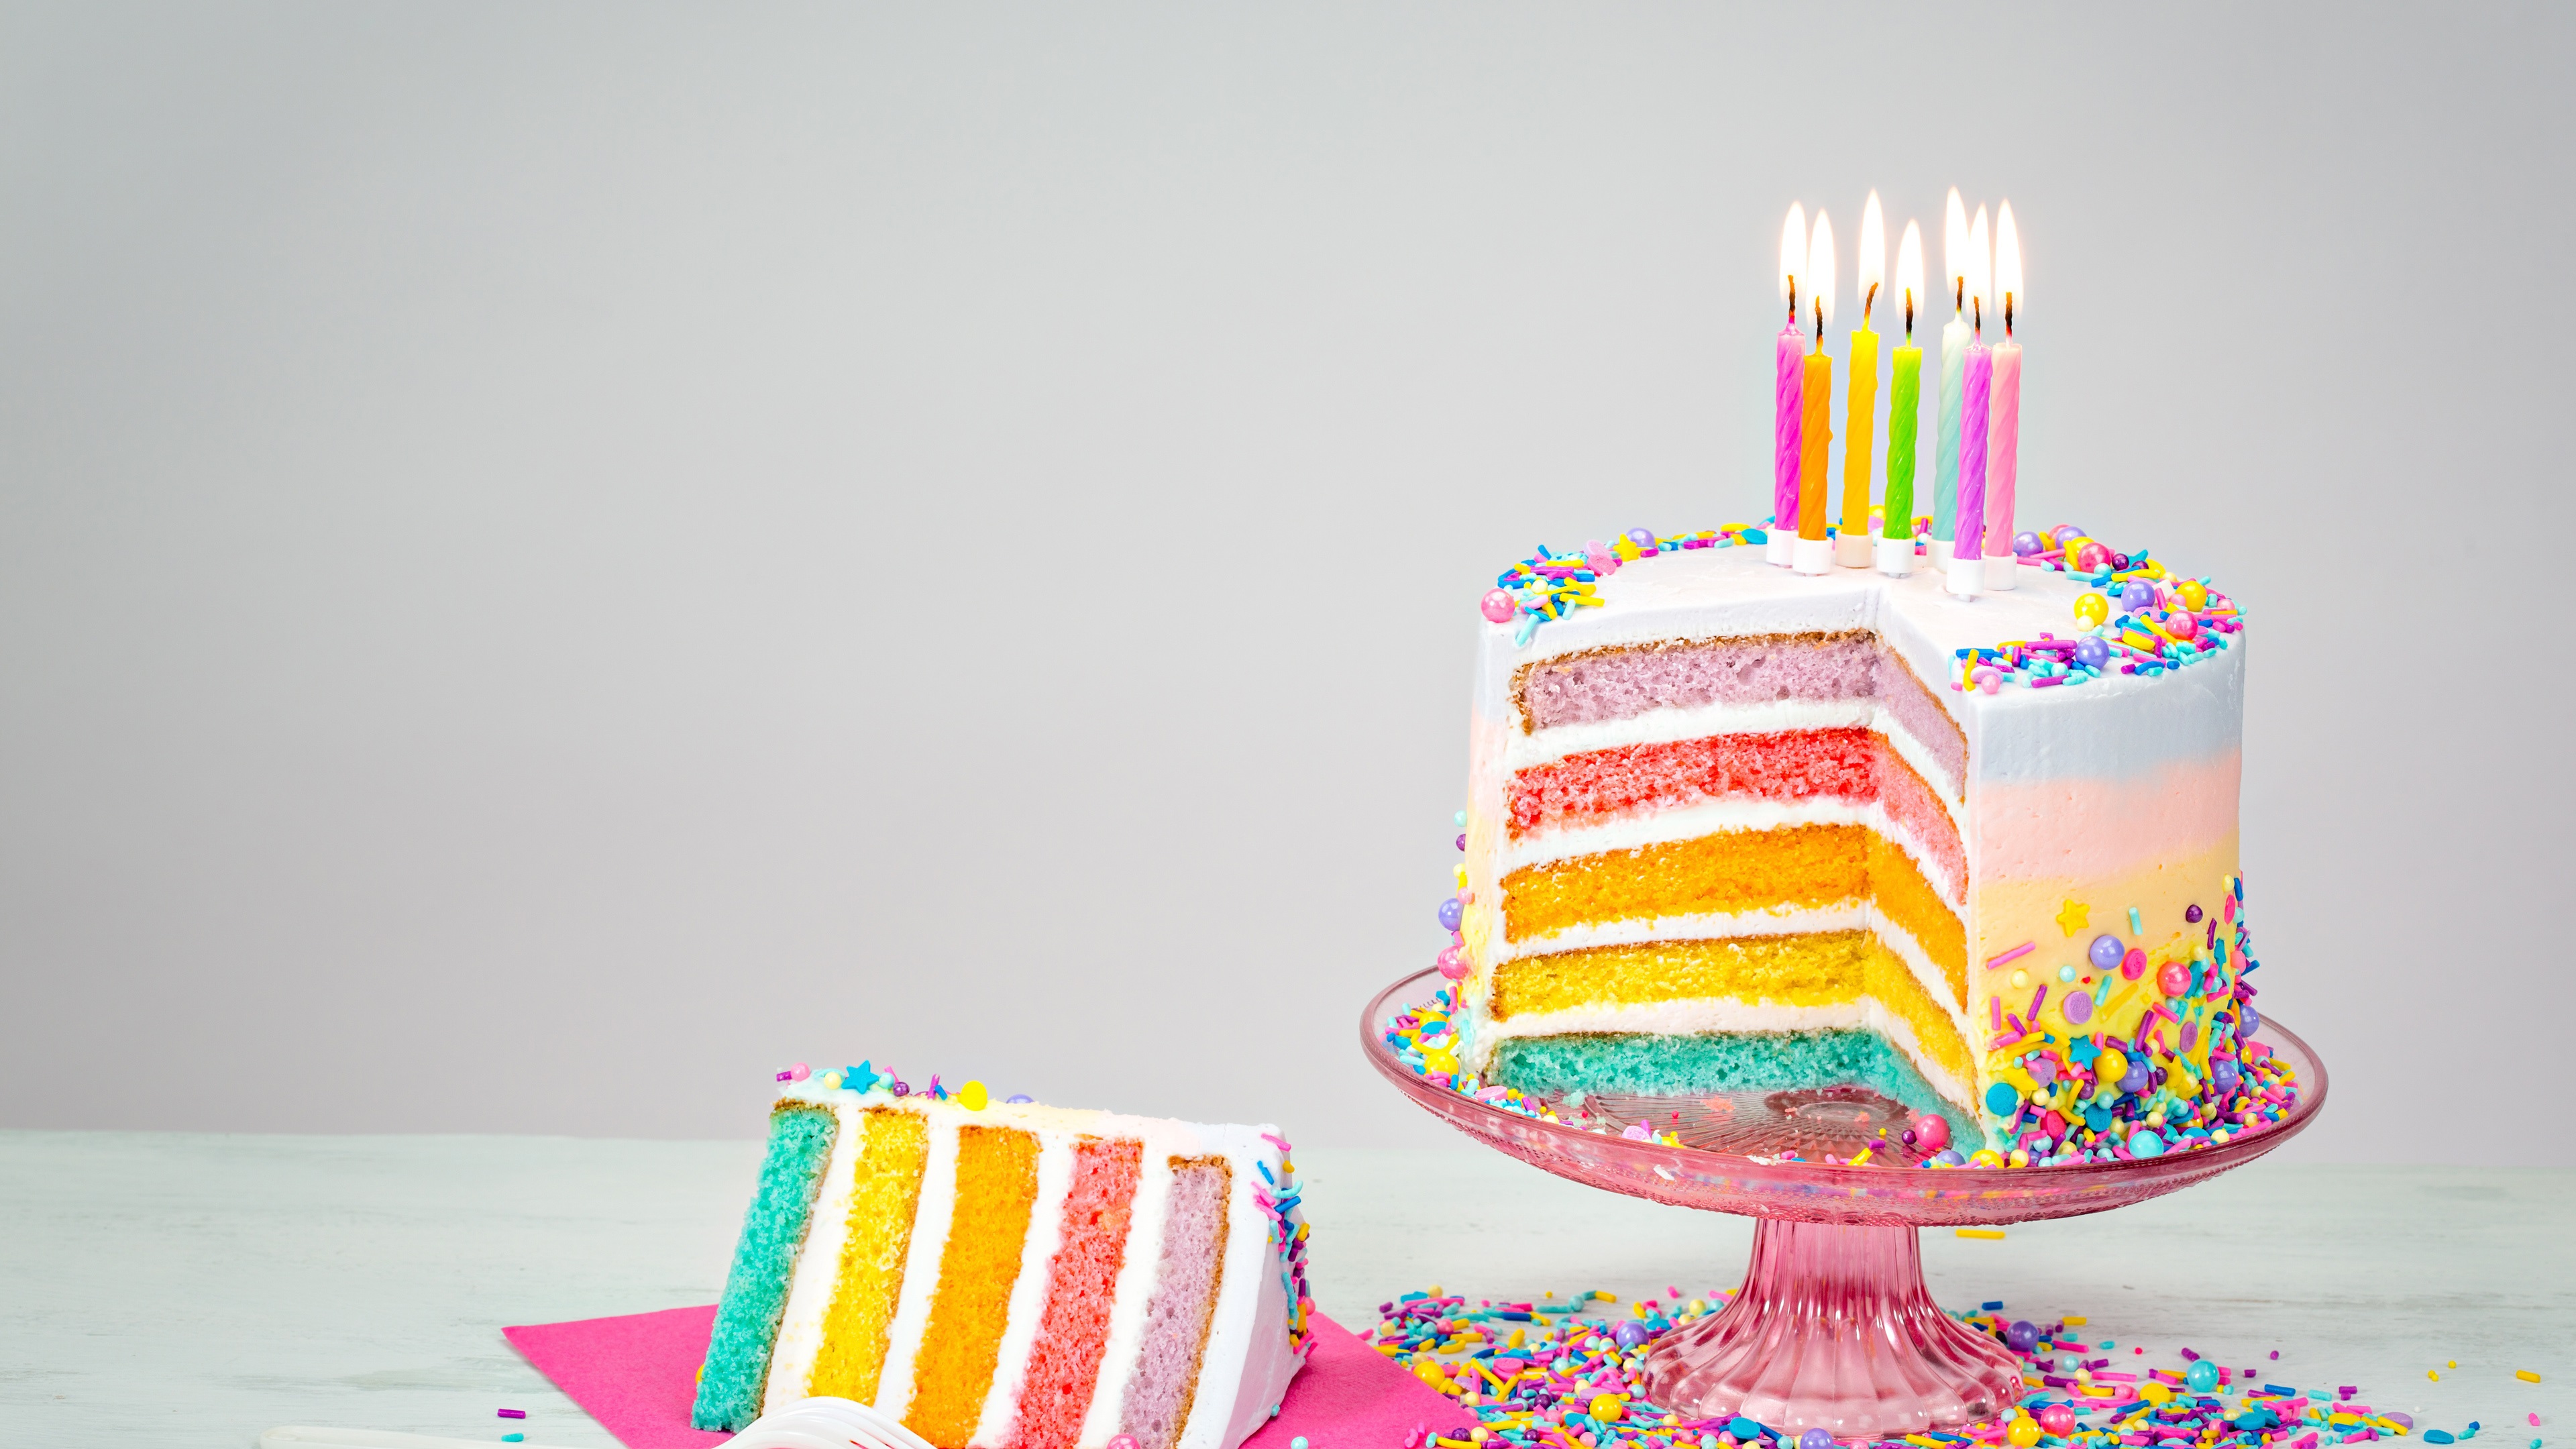 Wallpaper Rainbow colors birthday cake, candles, flame 3840x2160 UHD